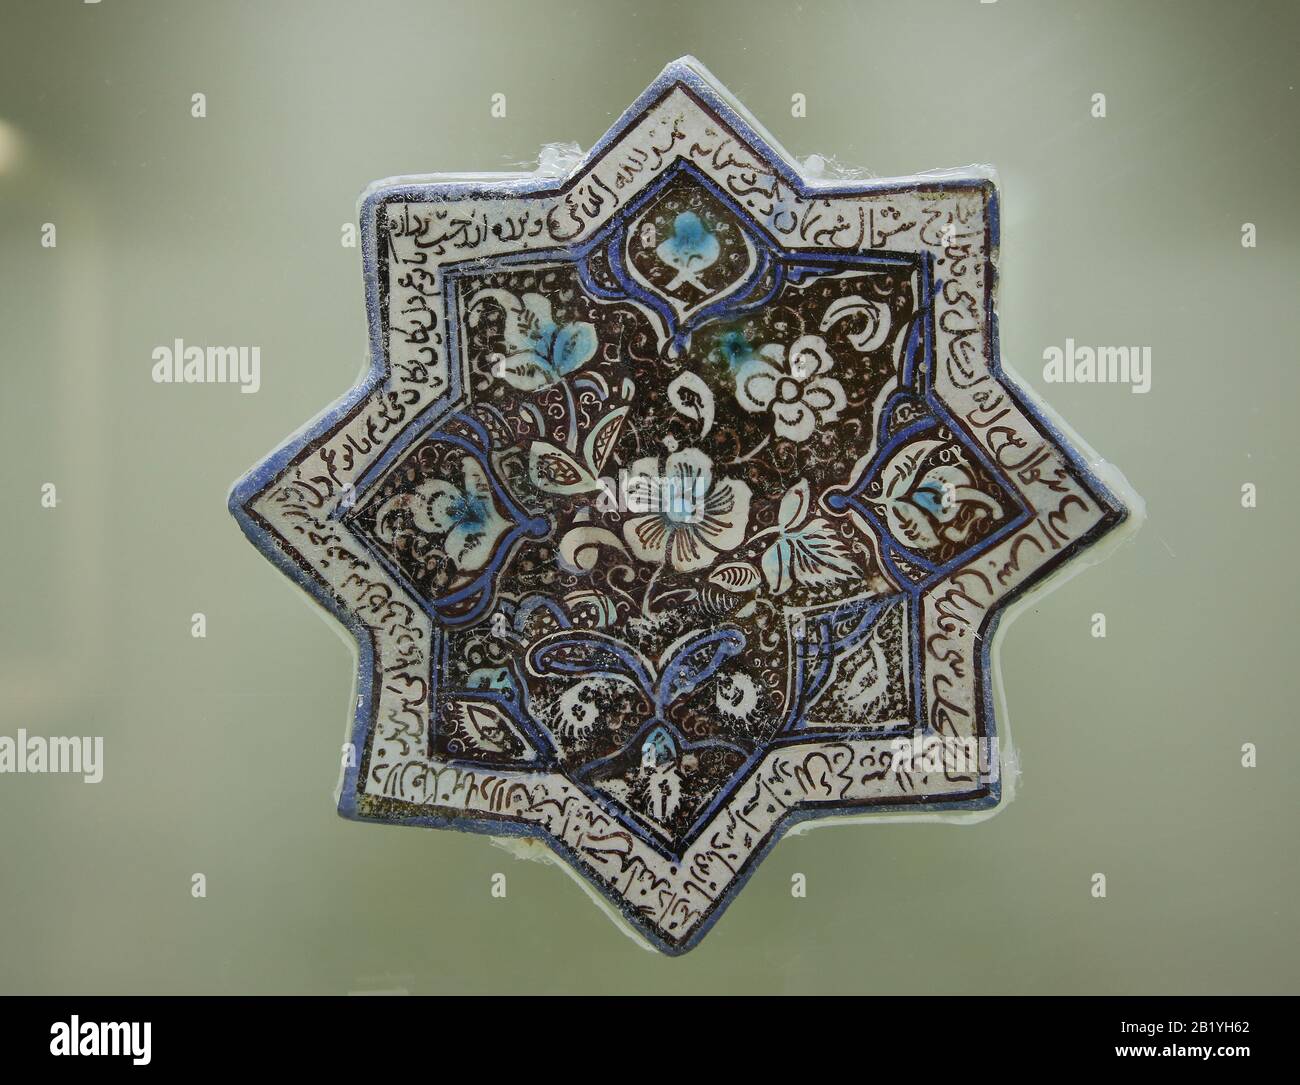 Tiles. Lustre technique glazed. 8 pointed star. Ilkhanid period. Kashan, Iran. 13th cent. Istanbul Archaeology Museums. Museum of Islamic Art. Stock Photo